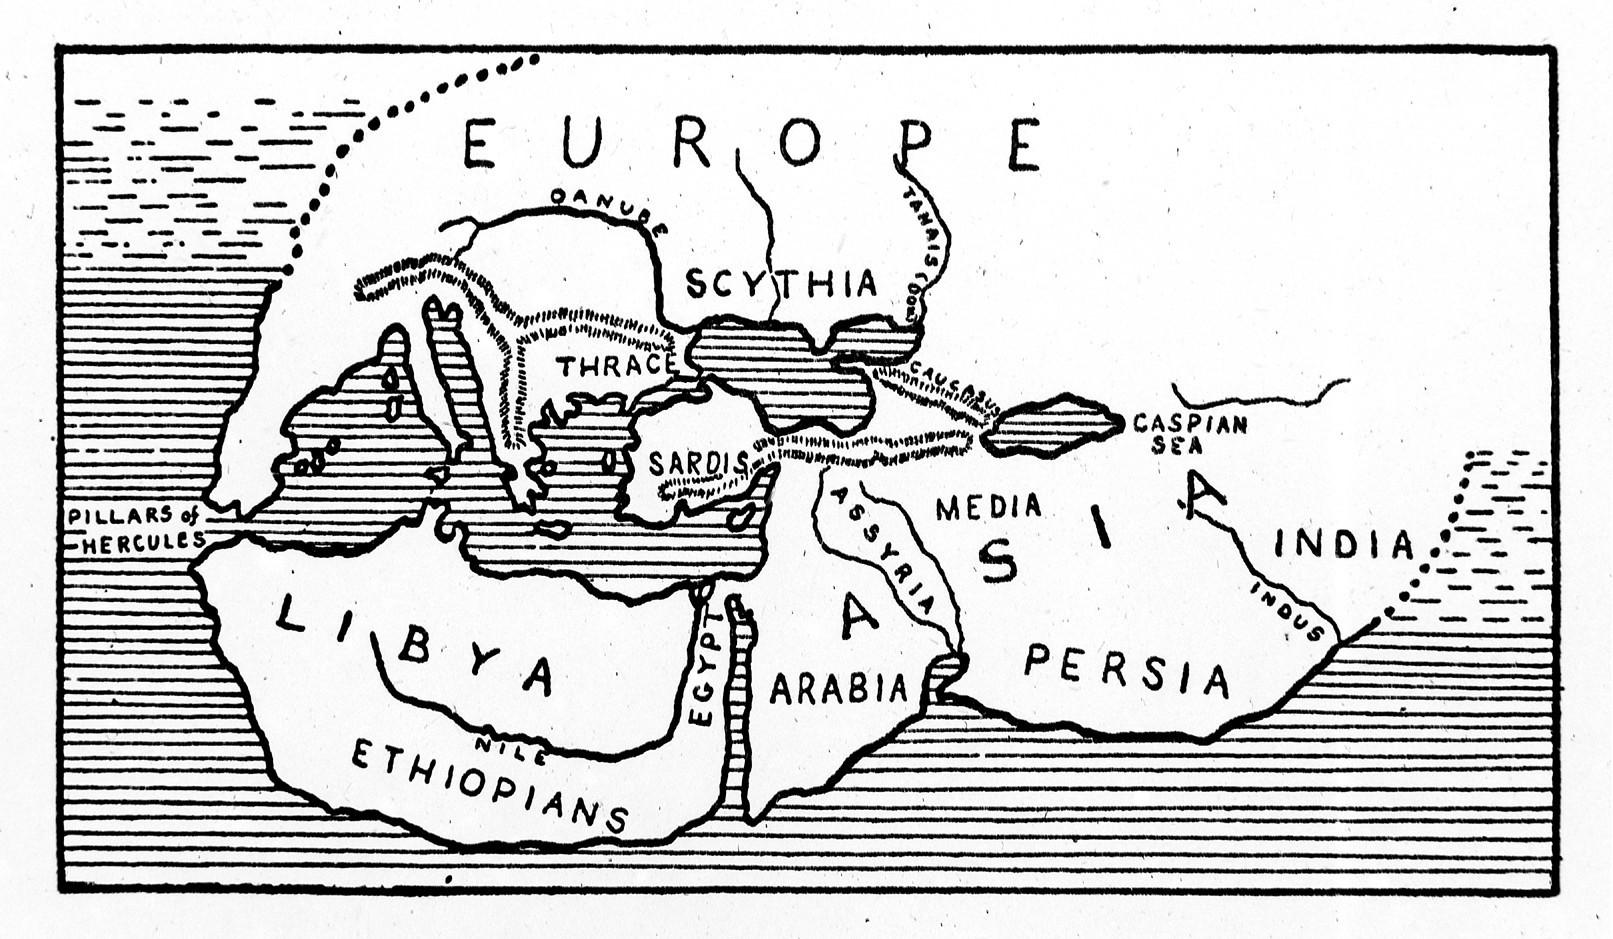 Line drawing map of the world according to Herodotus